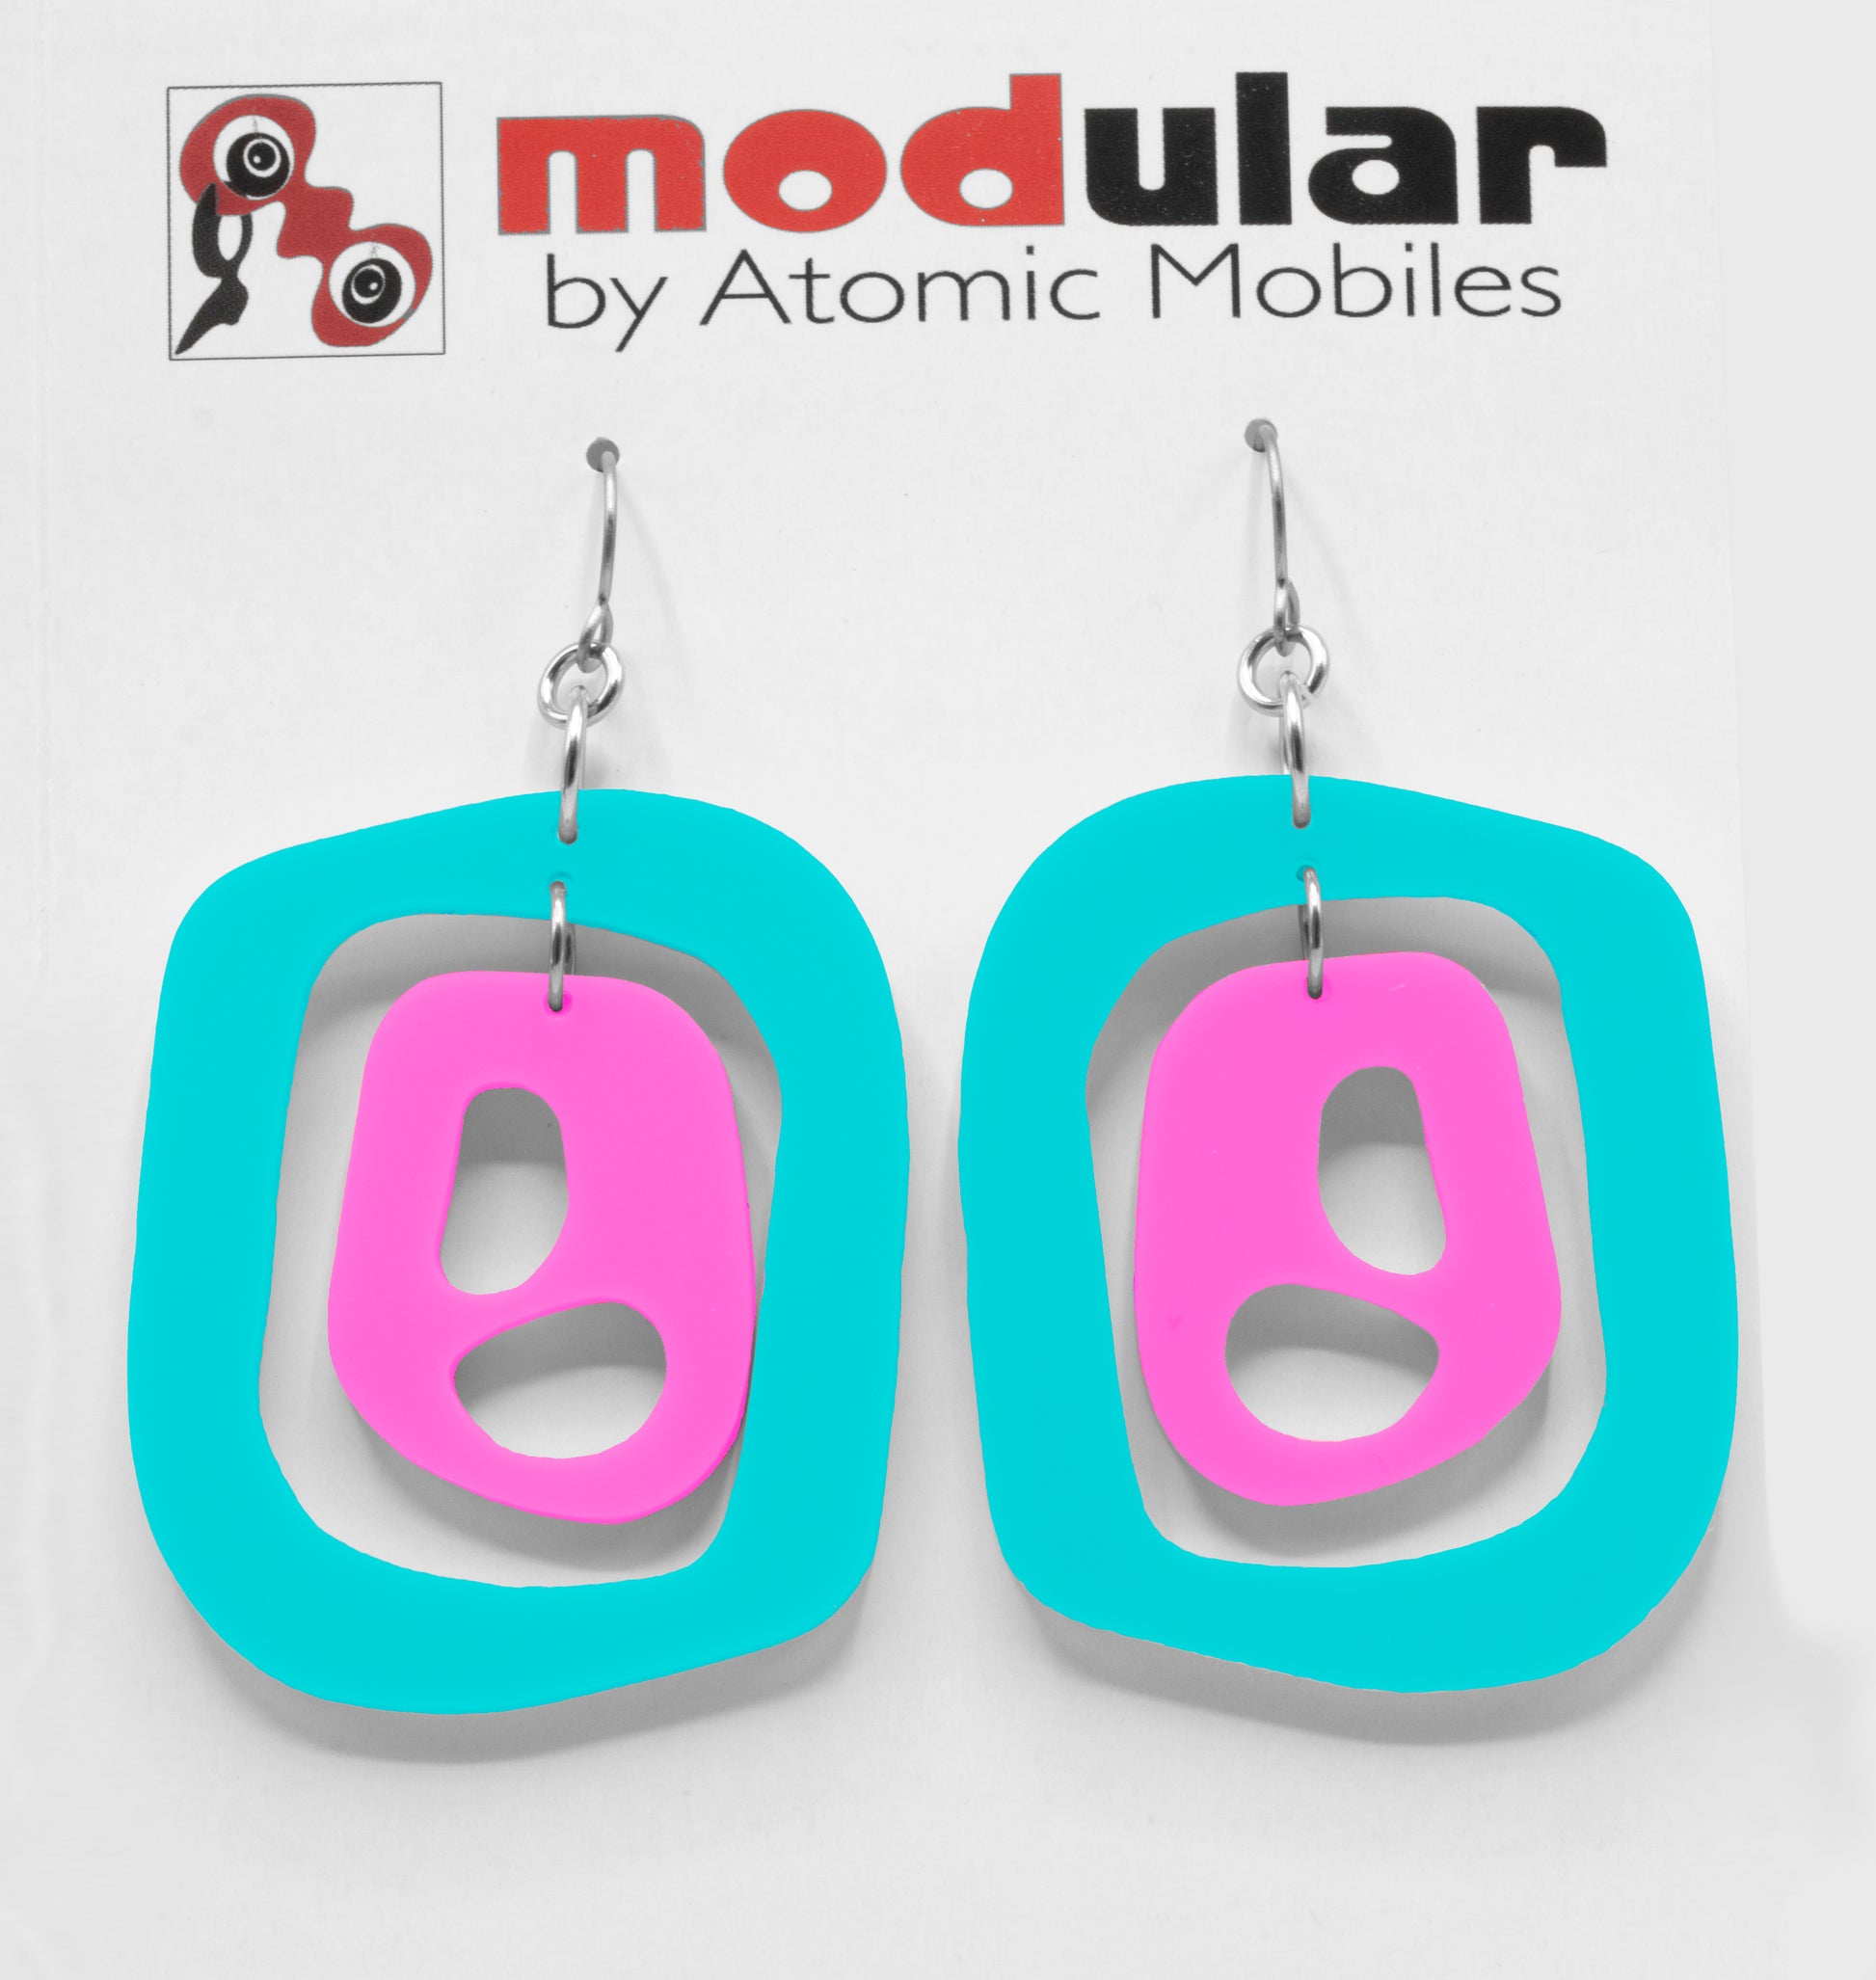 MODular Earrings - Mid 20th Statement Earrings in Aqua and Hot Pink by AtomicMobiles.com - retro era mod handmade jewelry